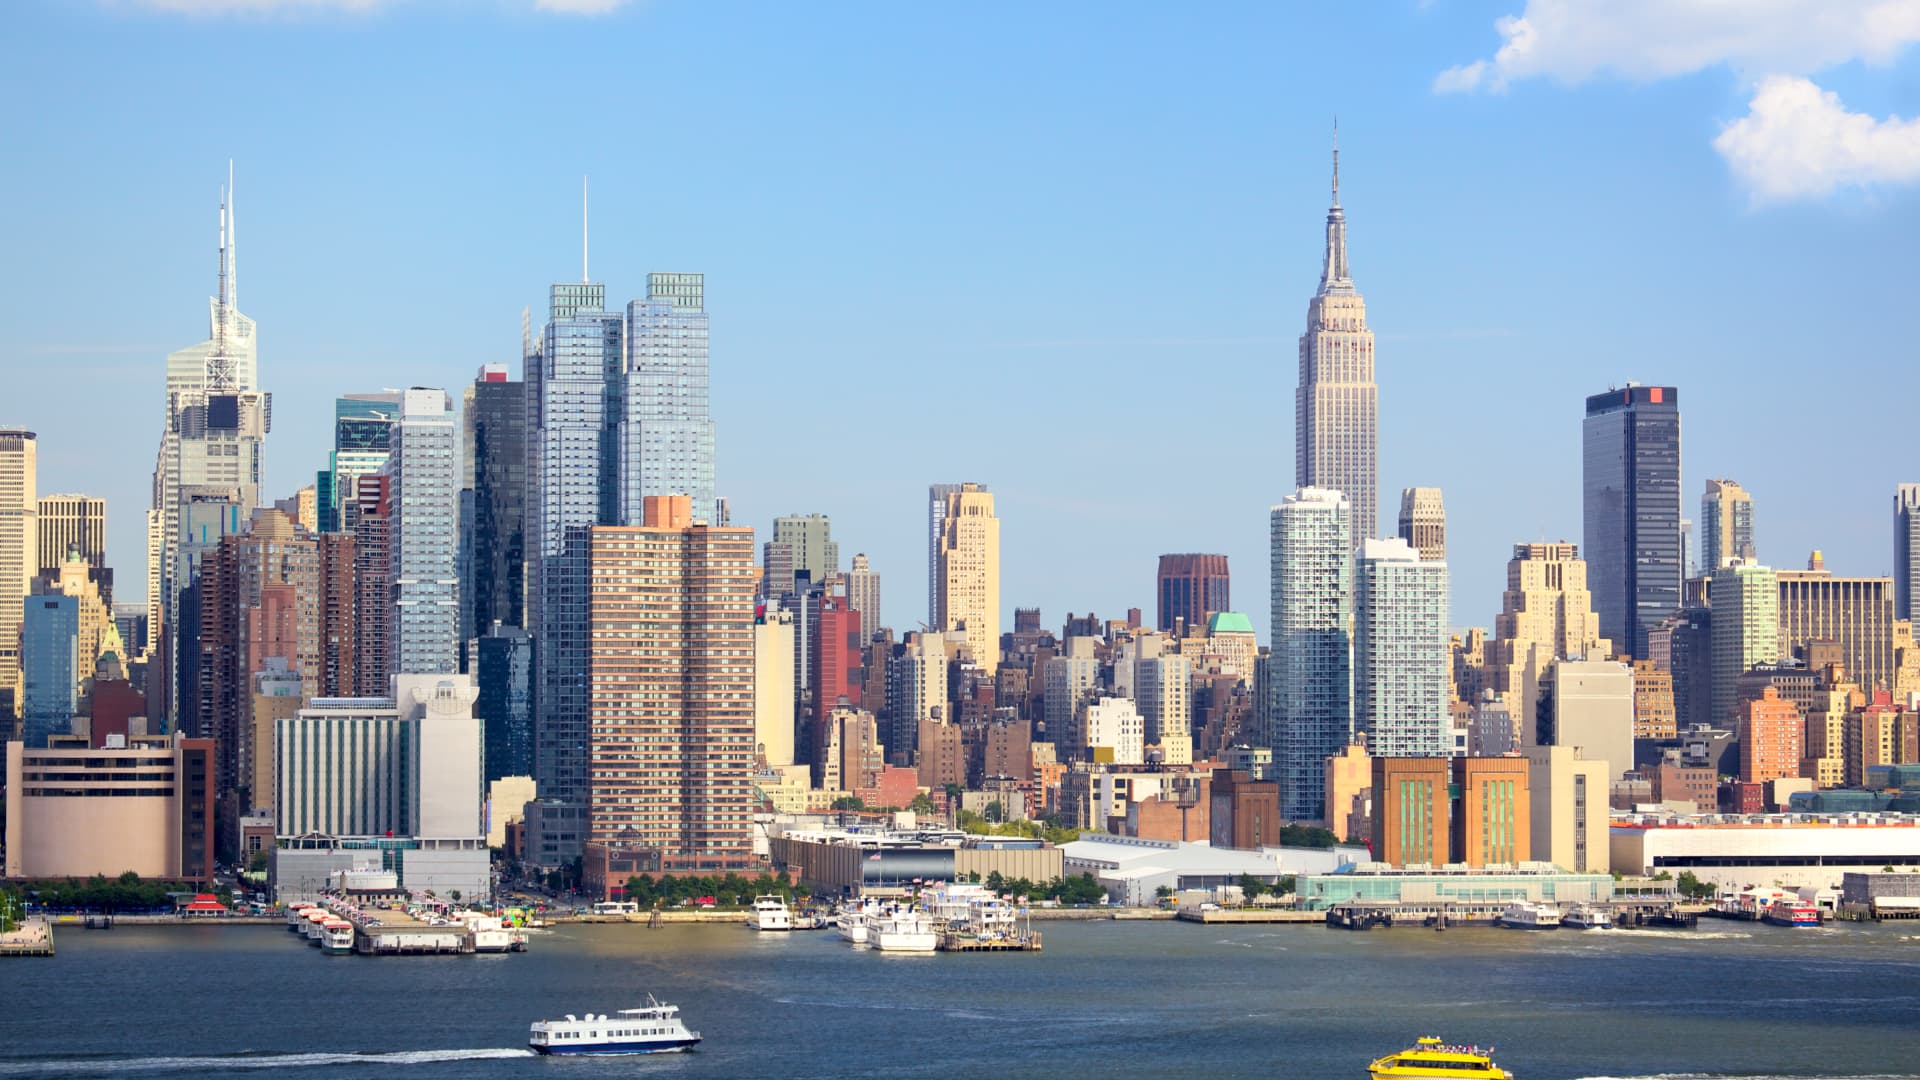 New York City is the no. 1 trending summer destination in the U.S. for 2023, according to American Express Travel.